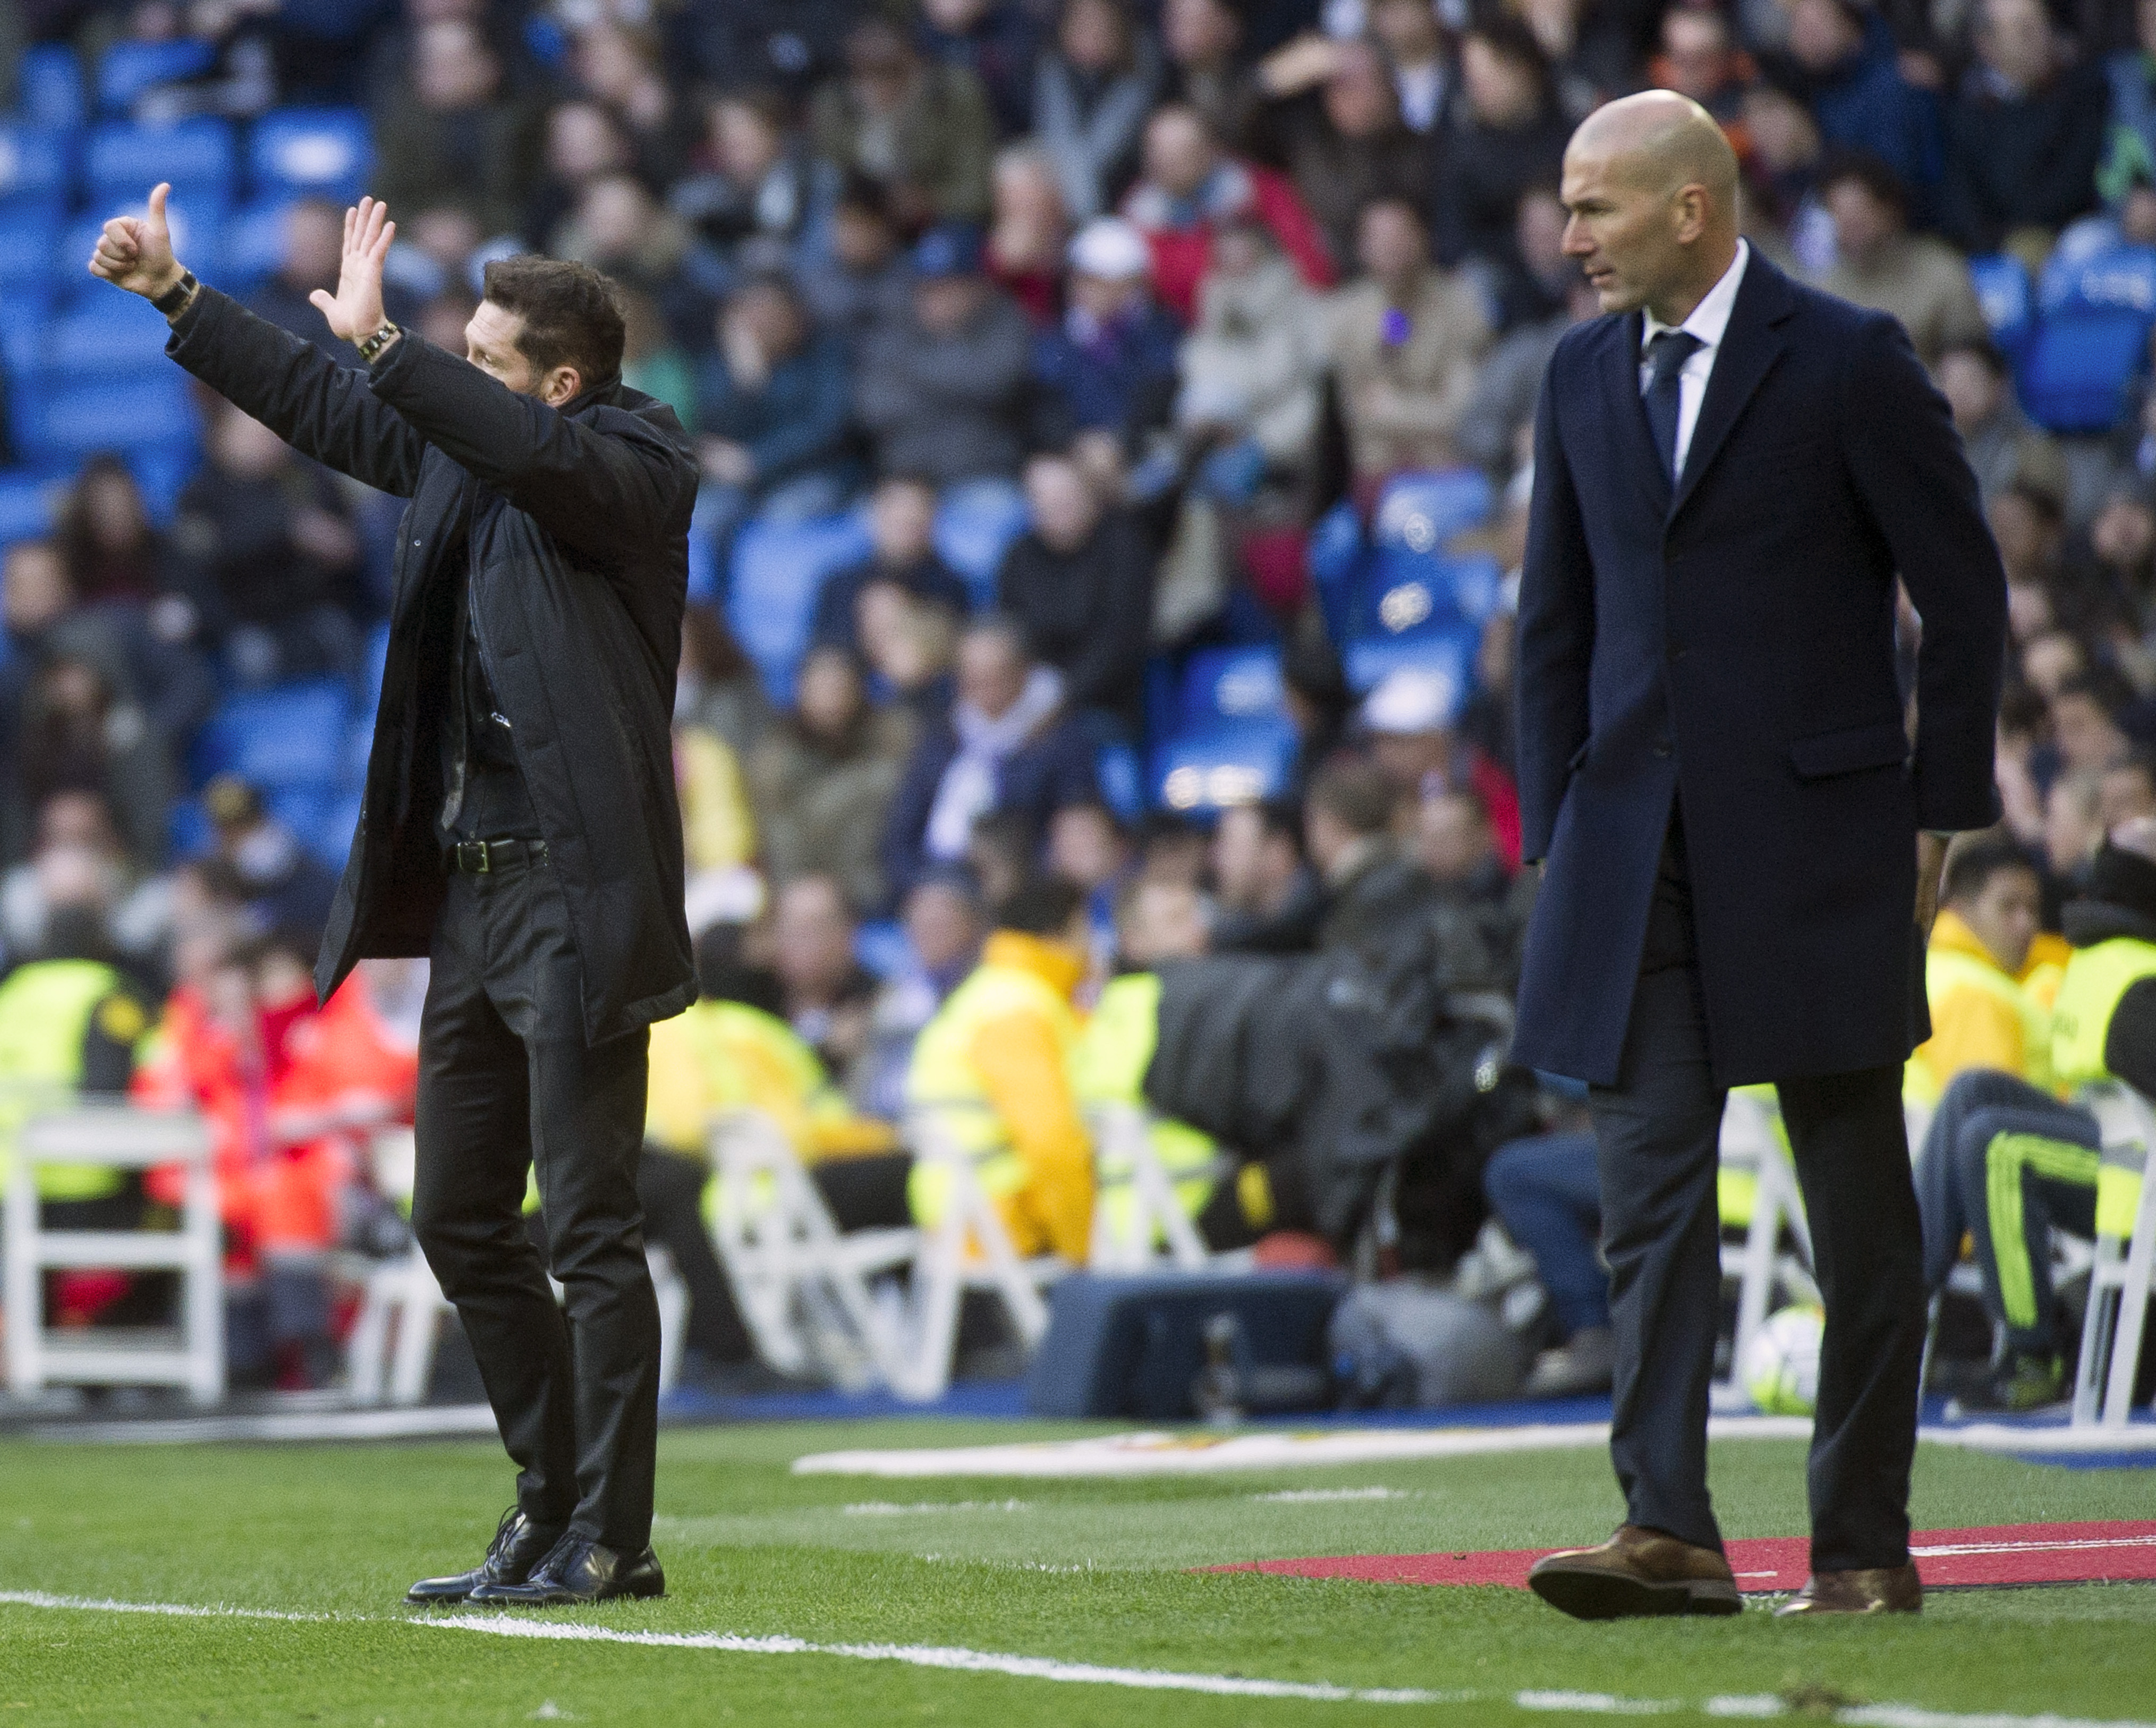 Atletico Madrid's Argentinian coach Diego Simeone (L) gestures next to Real Madrid's French coach Zinedine Zidane during the Spanish league football match Real Madrid CF vs Club Atletico de Madrid at the Santiago Bernabeu stadium in Madrid on February 27, 2016. / AFP / CURTO DE LA TORRE        (Photo credit should read CURTO DE LA TORRE/AFP/Getty Images)